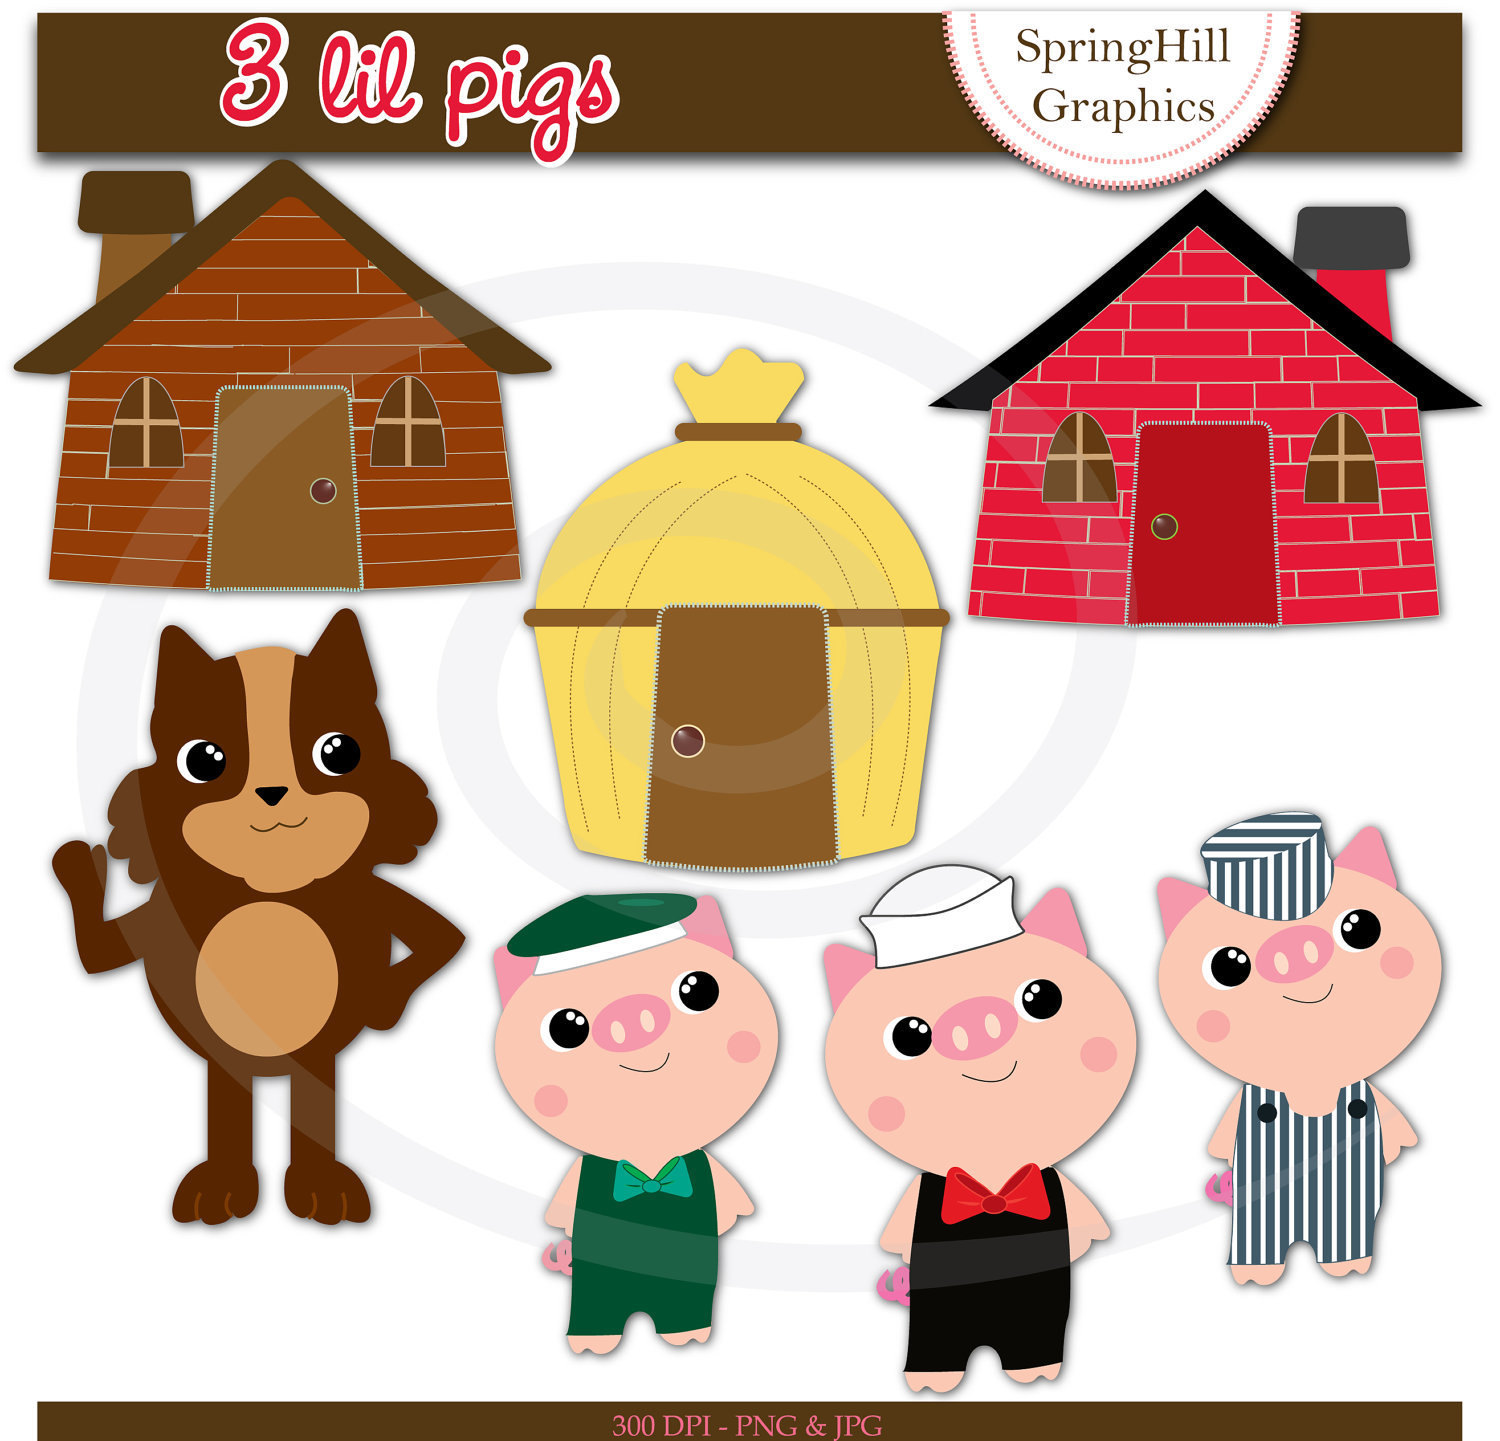 Three Little Pigs Houses Clipart.